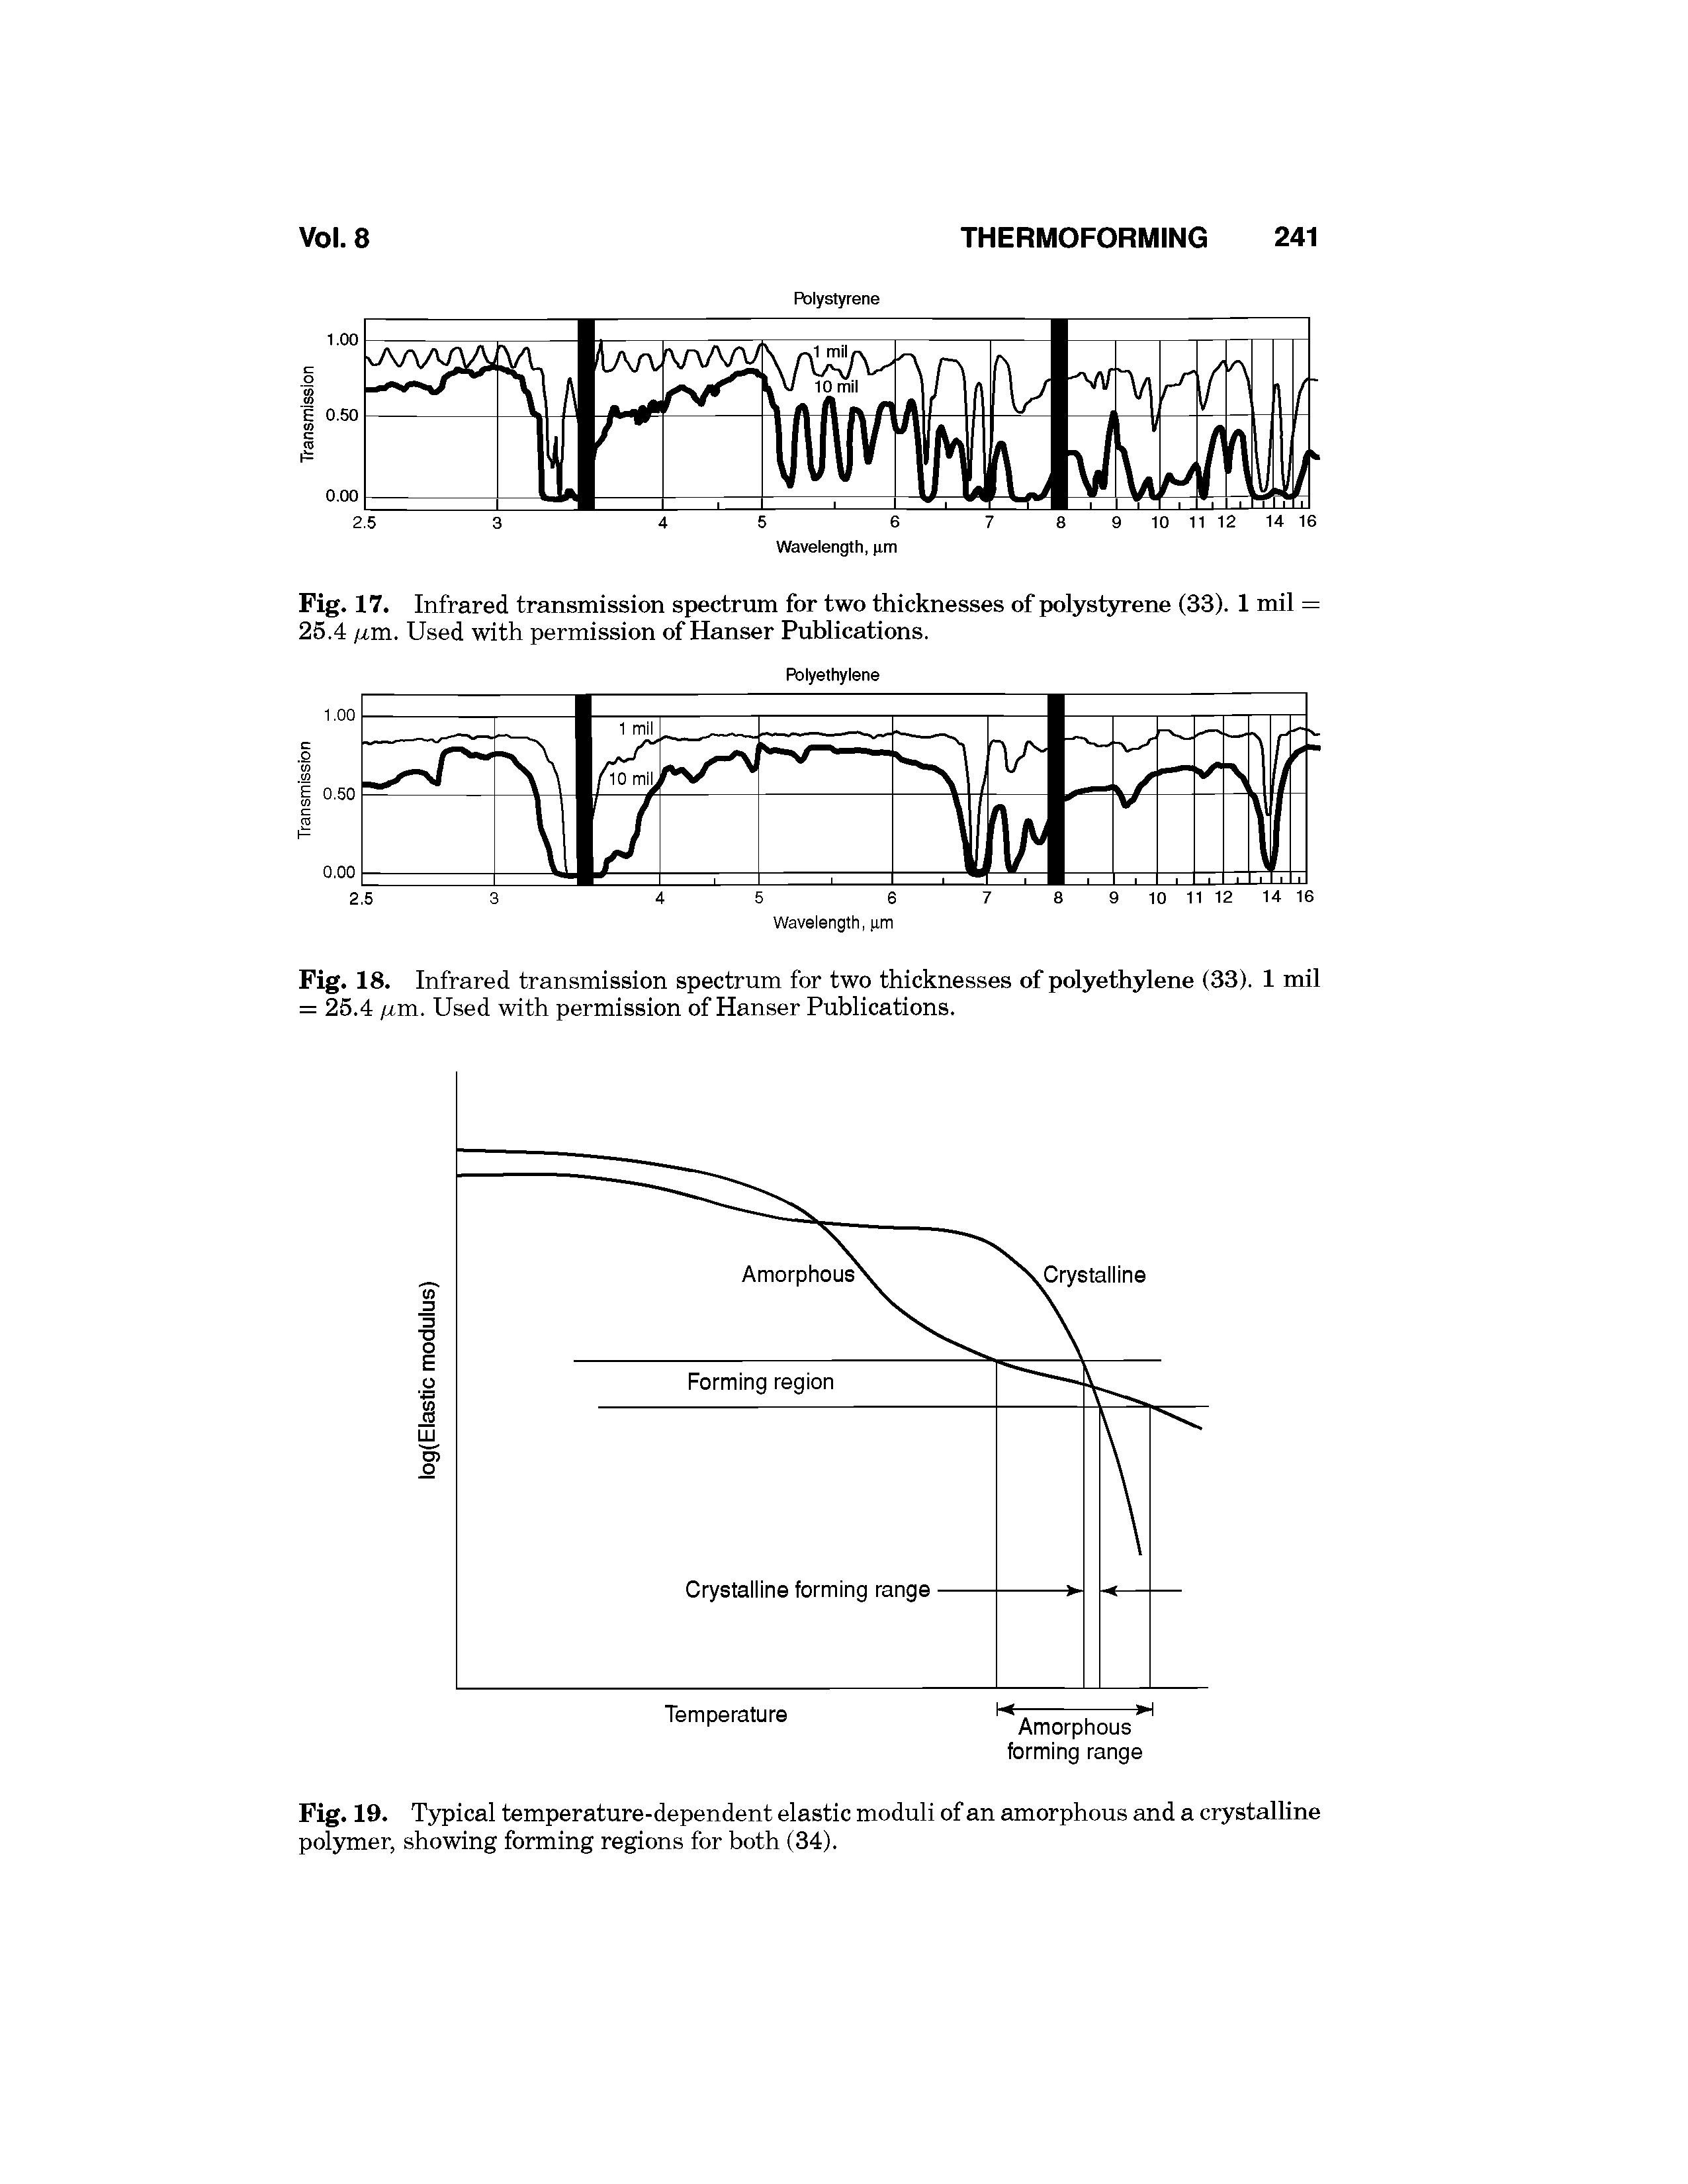 Fig. 18. Infrared transmission spectrum for two thicknesses of polyethylene (33). 1 mil = 25.4 ixm. Used with permission of Hanser Publications.